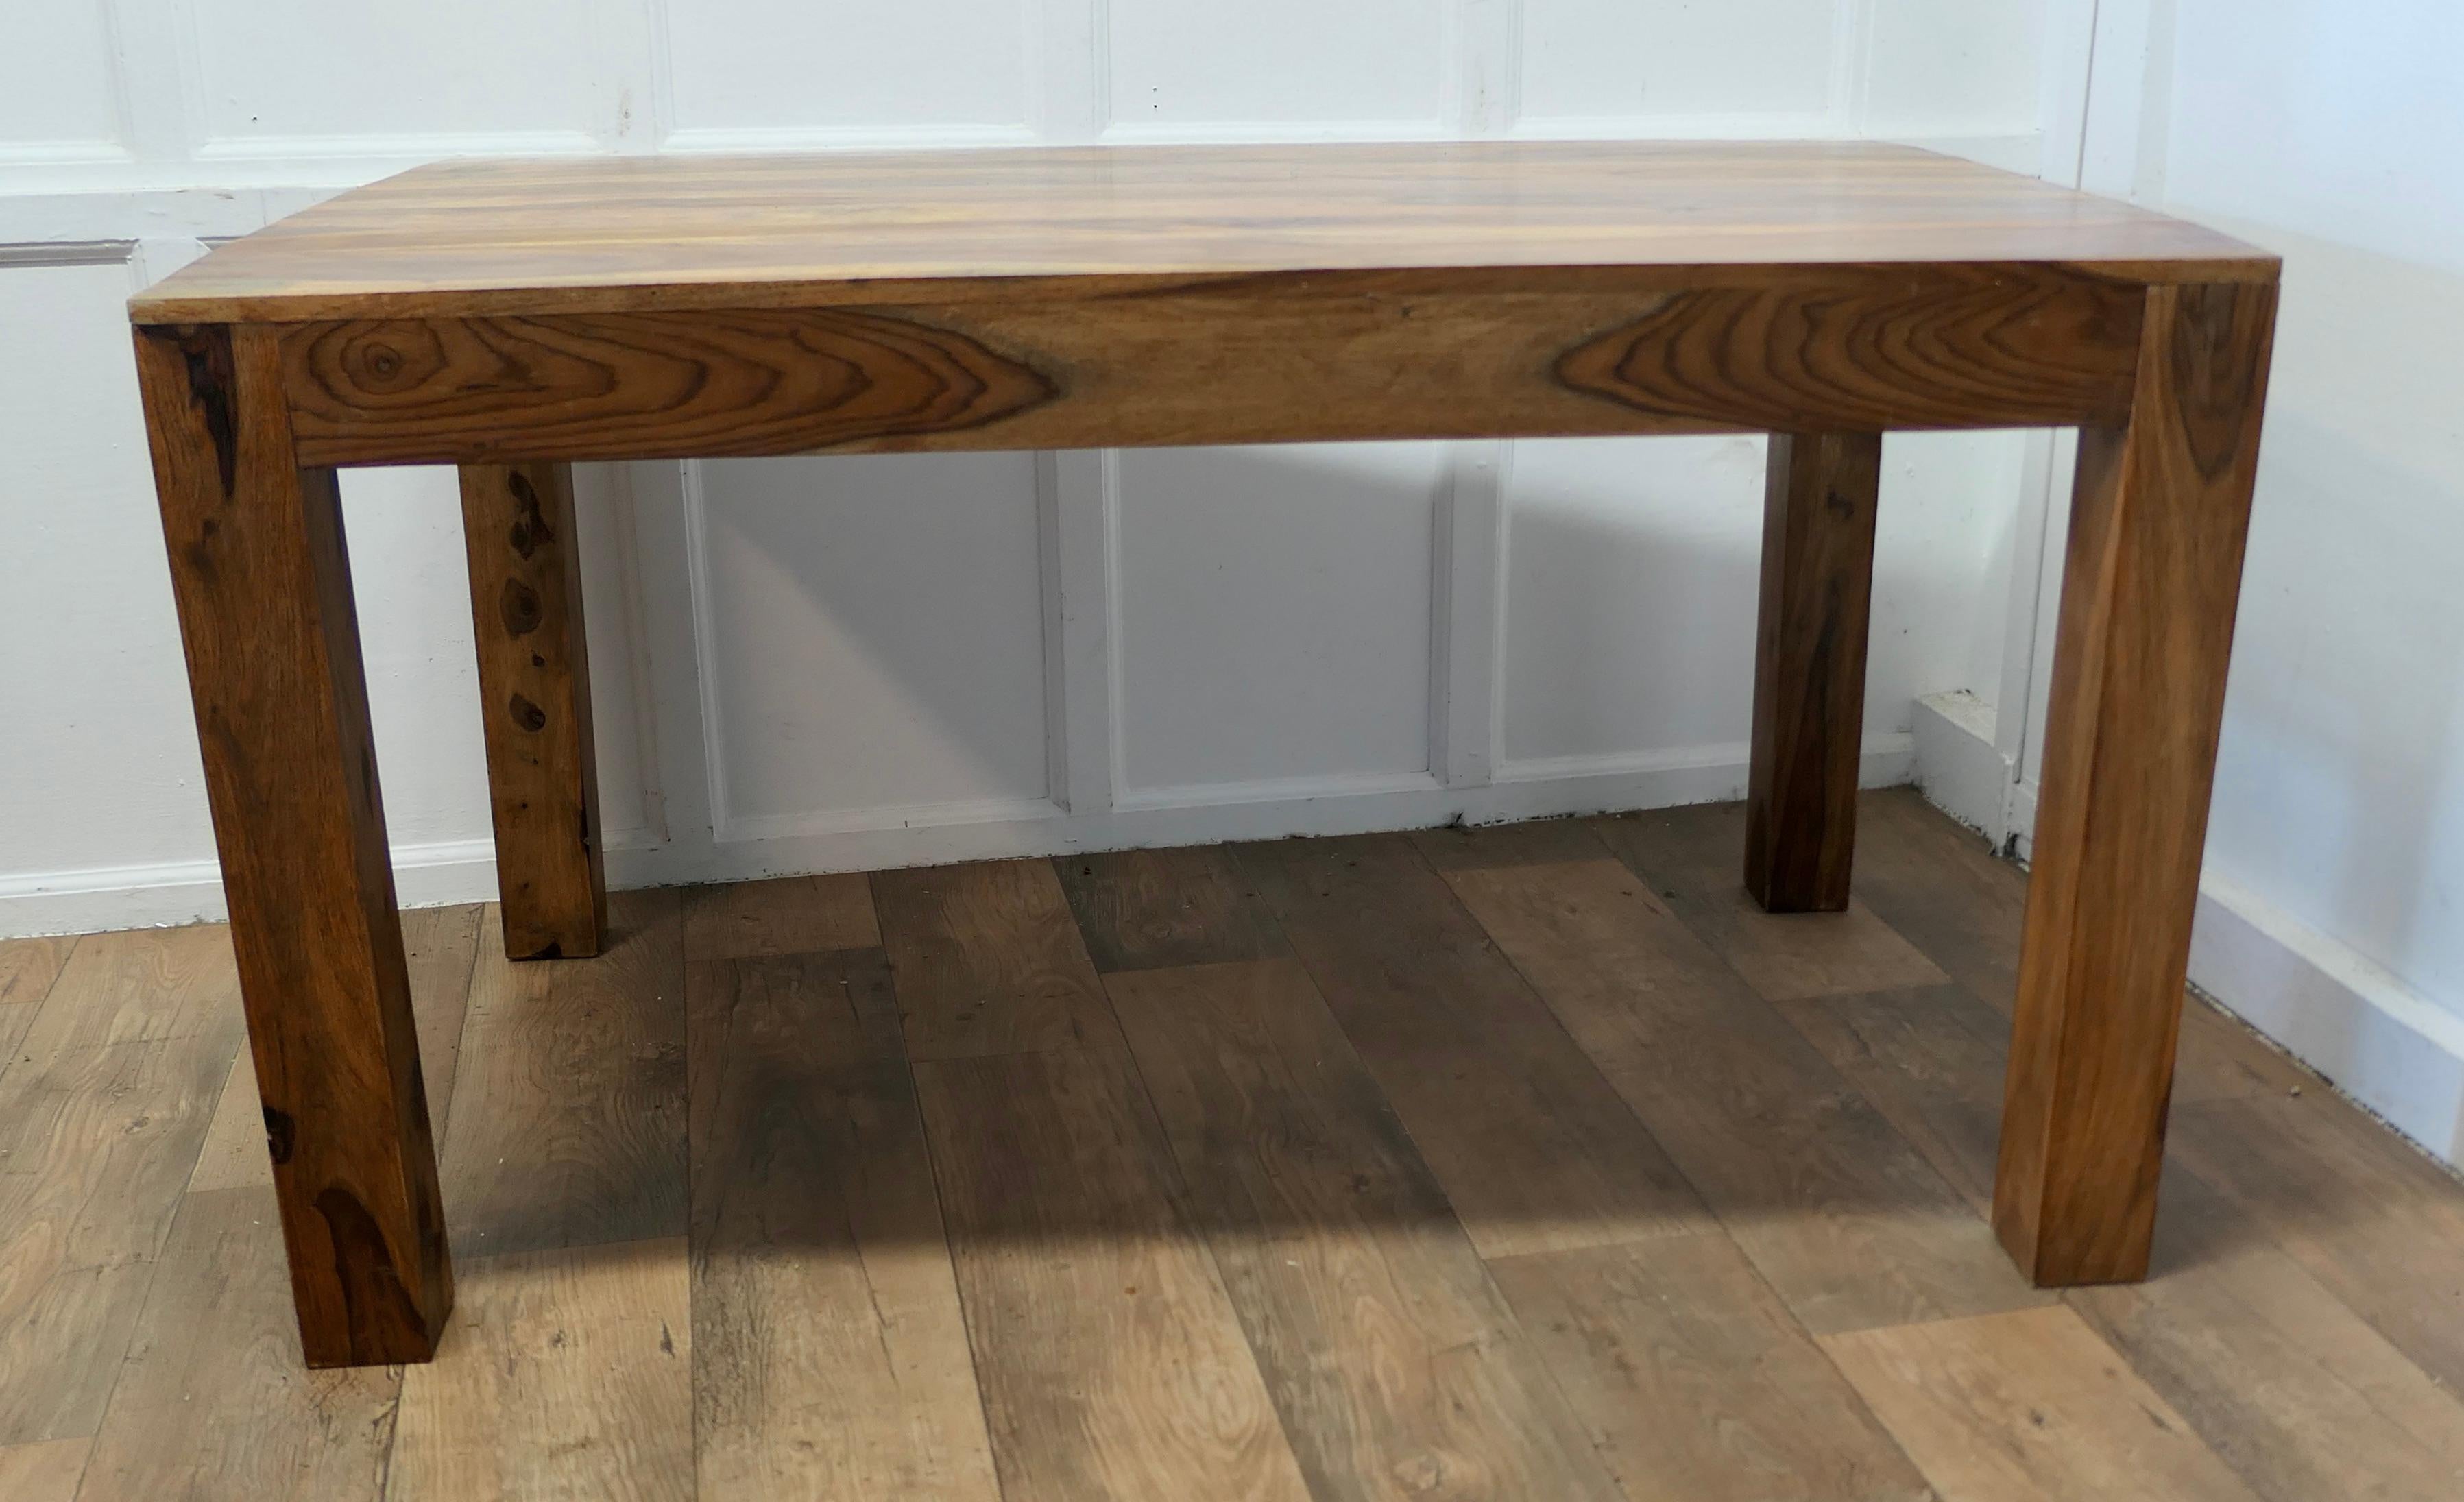 Charming Figured Fruitwood Kitchen Dining Table
 
The table is made in a very decorative hard fruitwood it has sturdy 3.5”square legs with a beautifully figured 1” thick plank top 
This good looking piece with a wonderful grain to the hard wood and